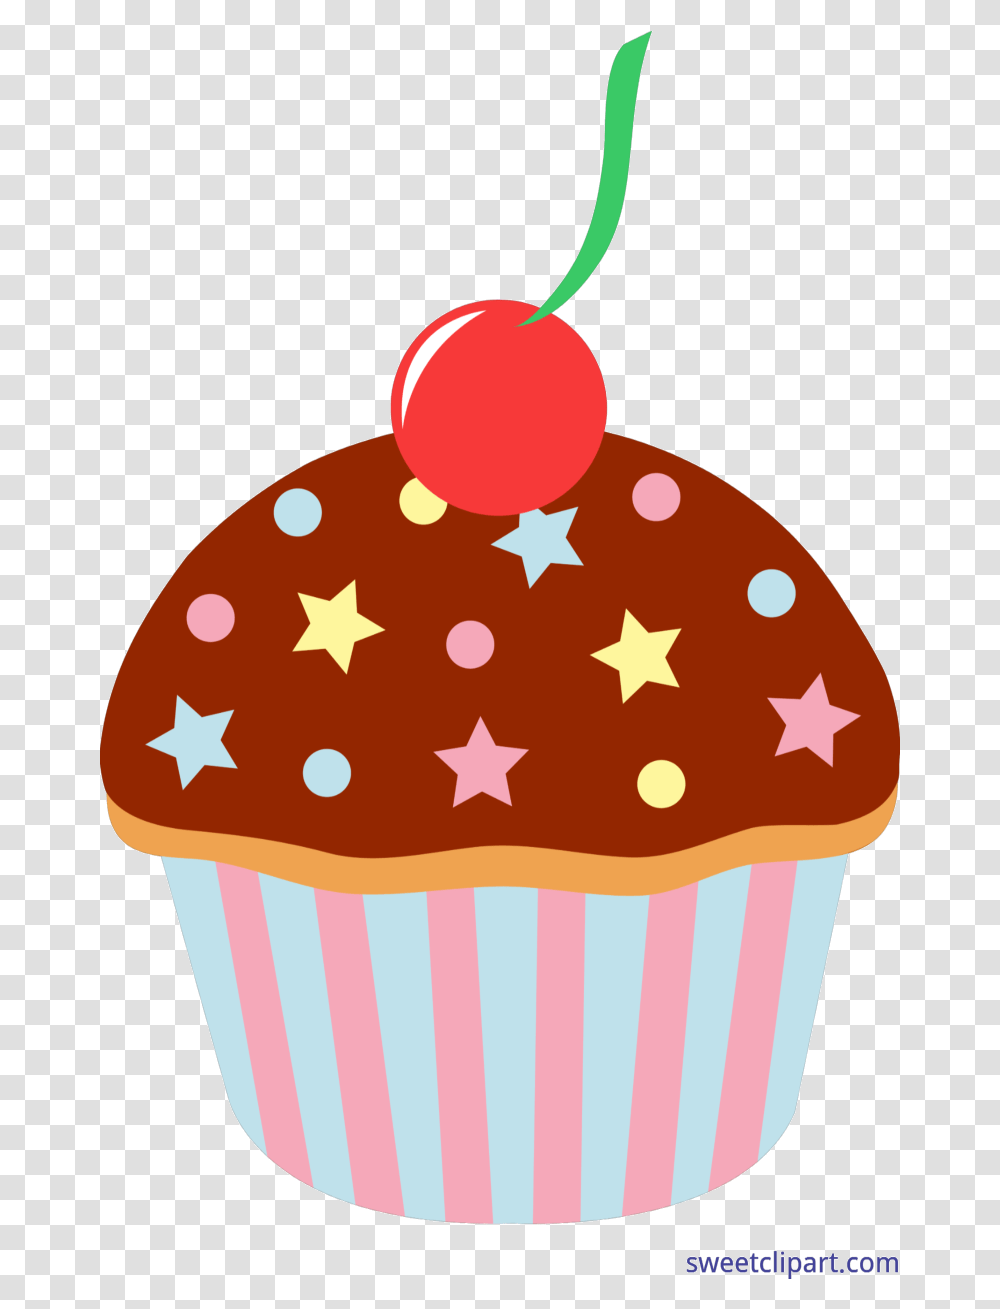 Sprinkles Chocolate With Clip Art Sweet Happy Birthday Cartoon Cakes And Sweets, Cupcake, Cream, Dessert, Food Transparent Png